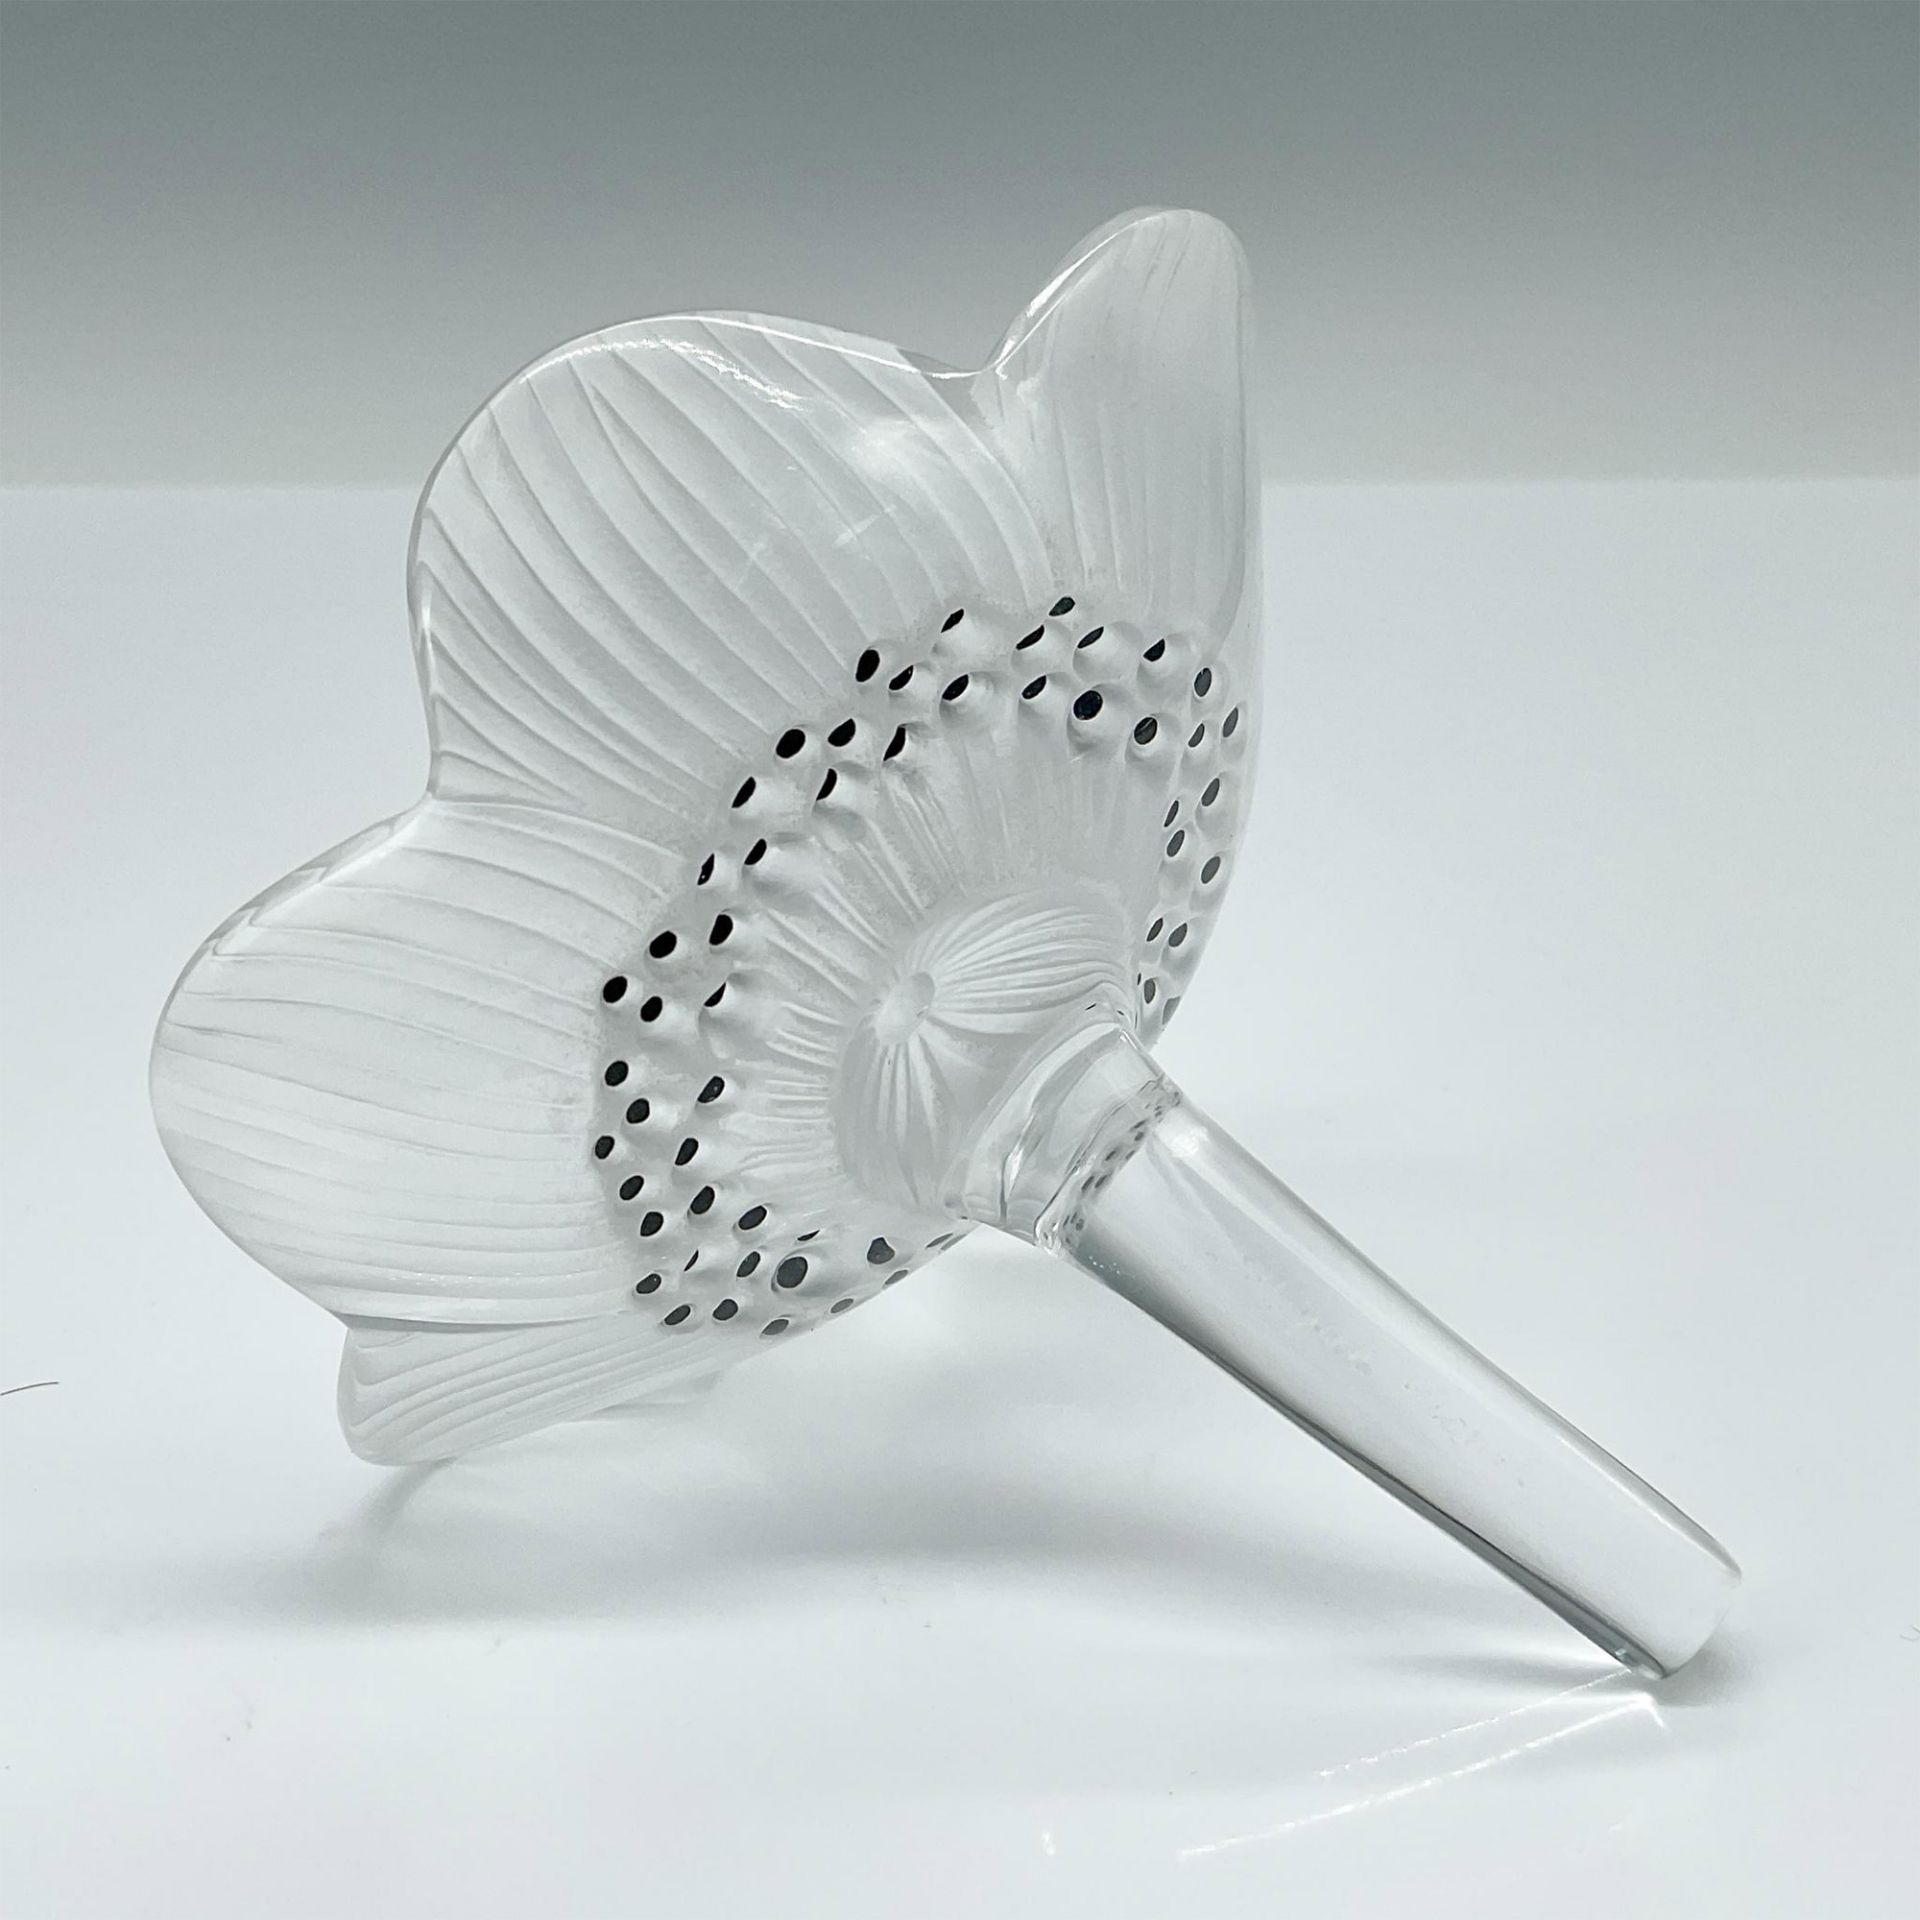 Lalique Crystal Flower Sculpture, Anemone - Image 3 of 3